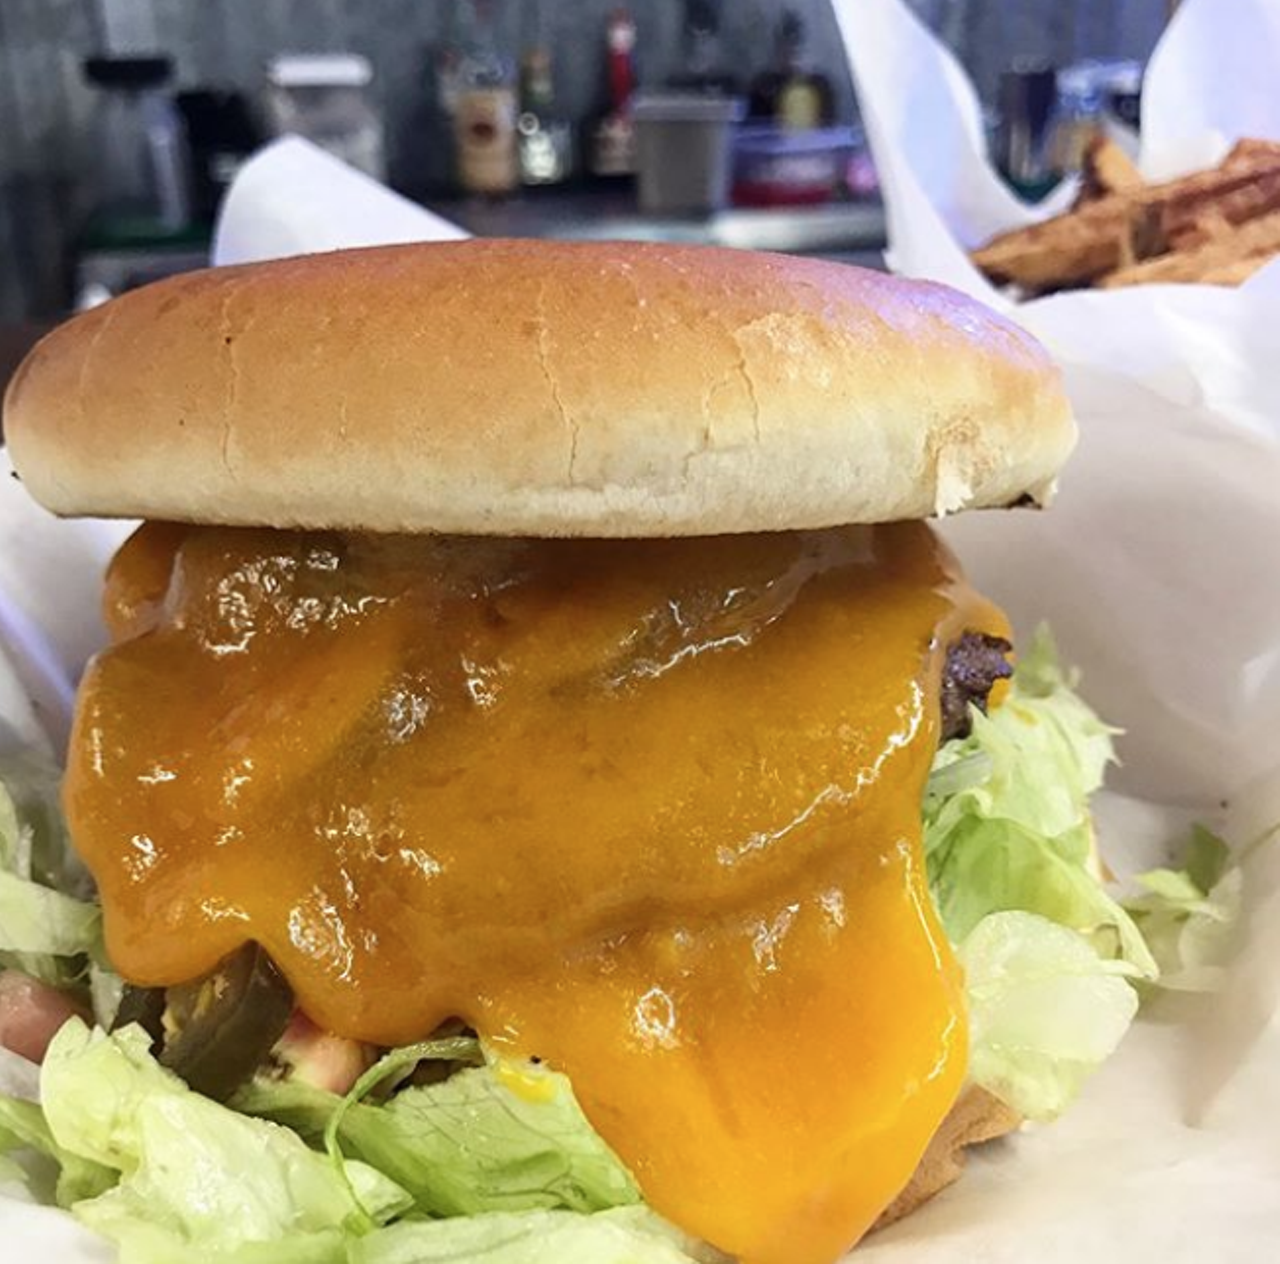 Brought to you by the sister of the late Chris Madrid, Diana’s Burgers brings everything you love about Chris Madrid’s, the burger spot, and put it under a roof on the city’s West Side. Yes, these burgers as cheesy as heck.
Photo via Instagram / sacurrent